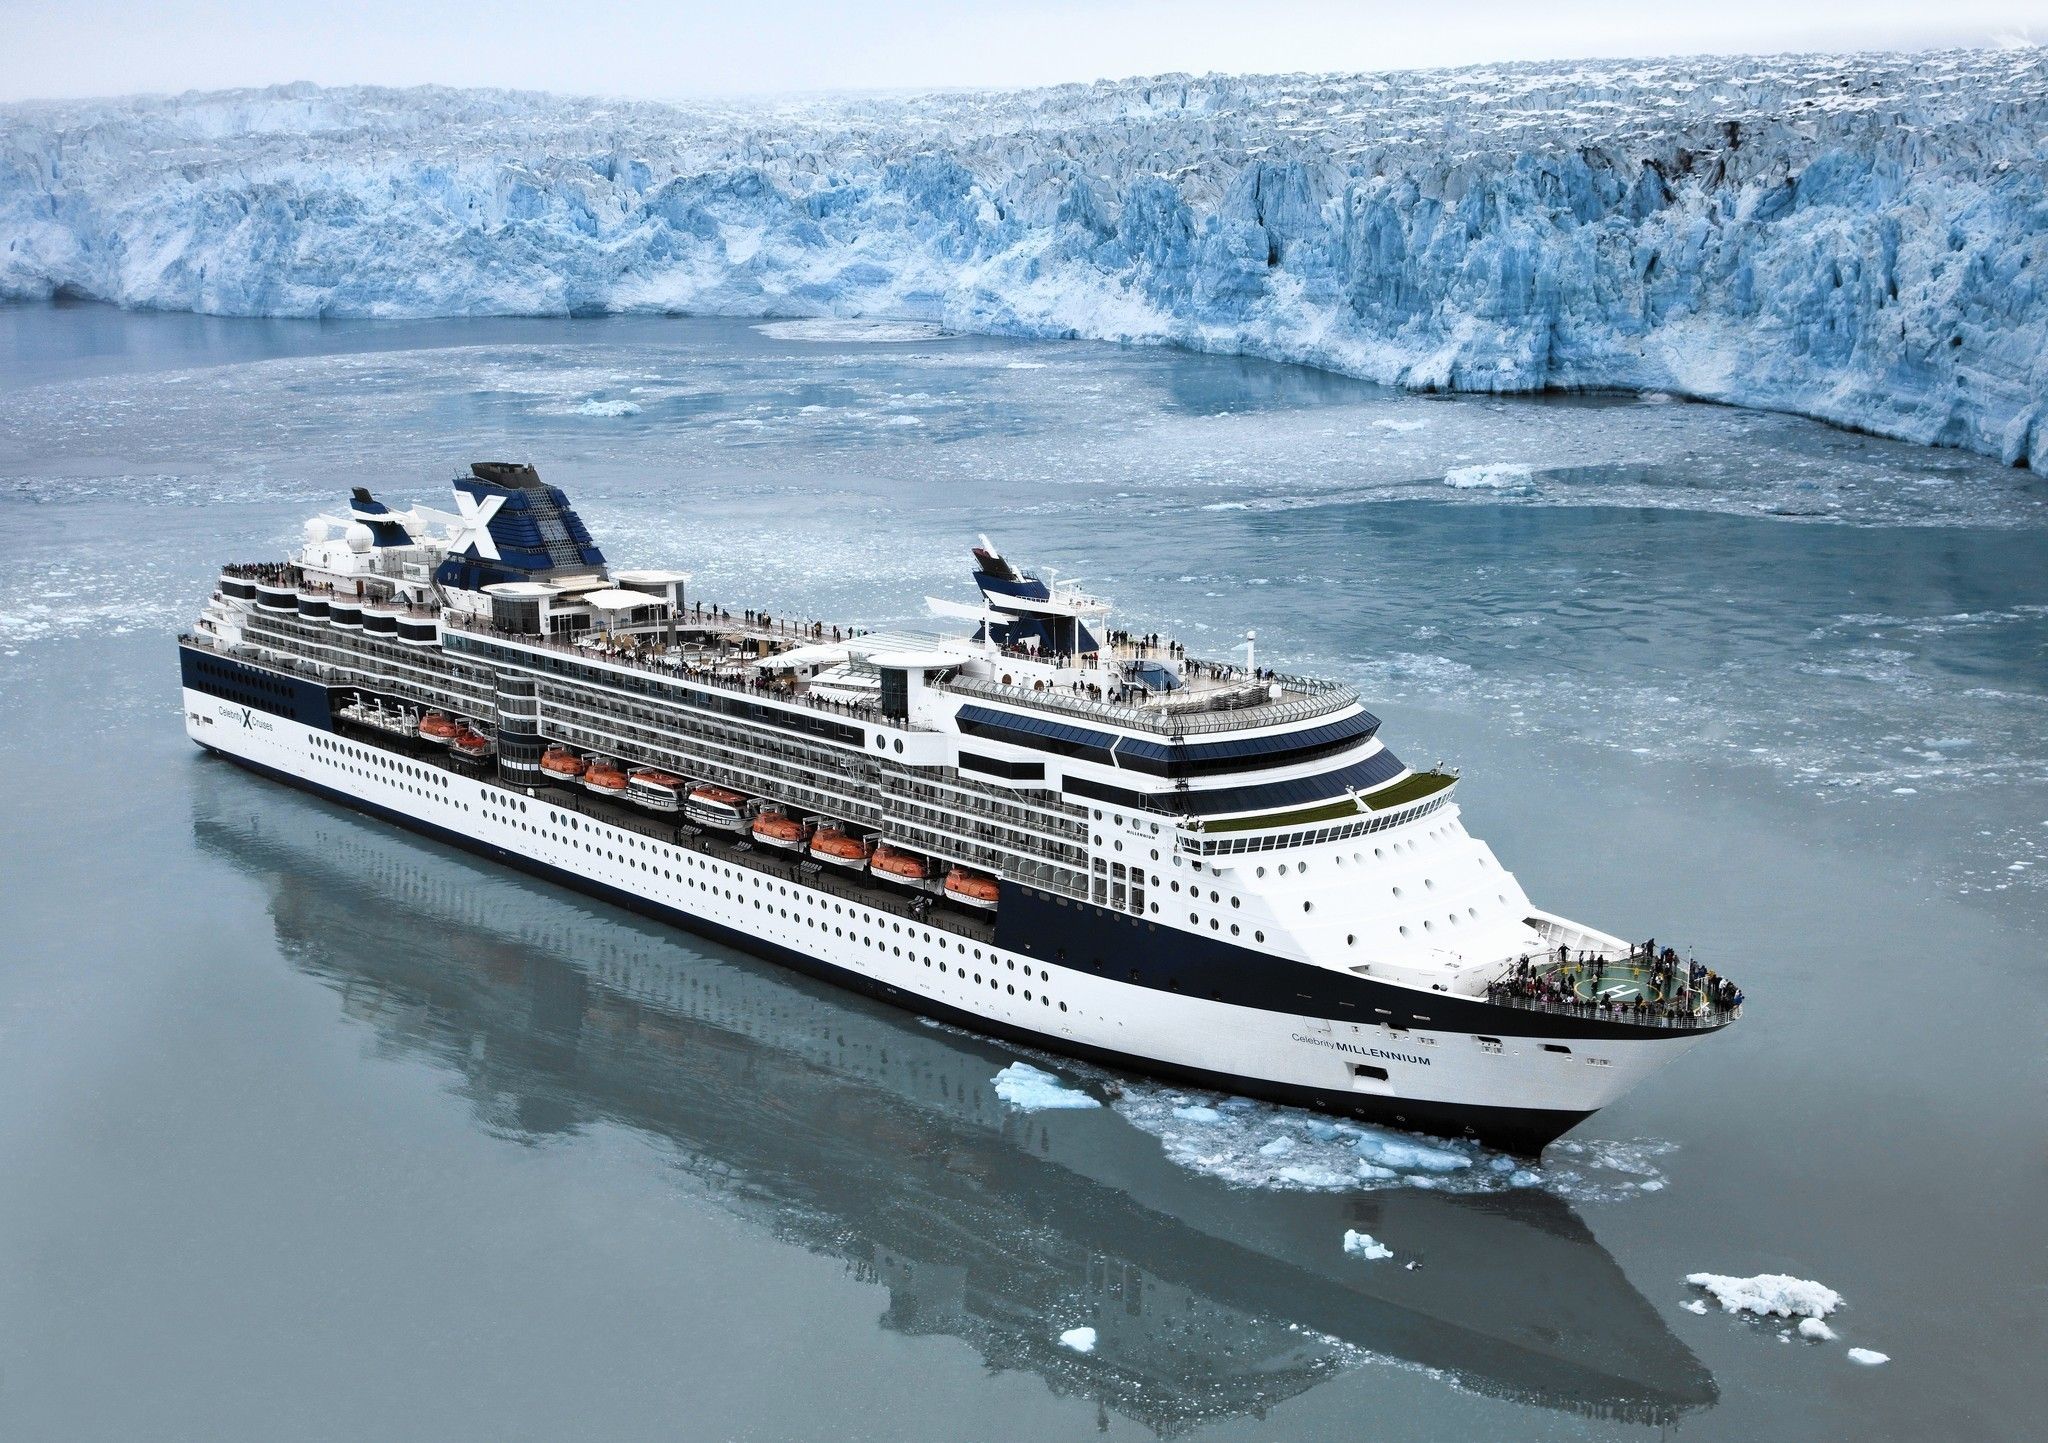 Celebrity Cruises offers fascinating one-off voyages from Vancouver